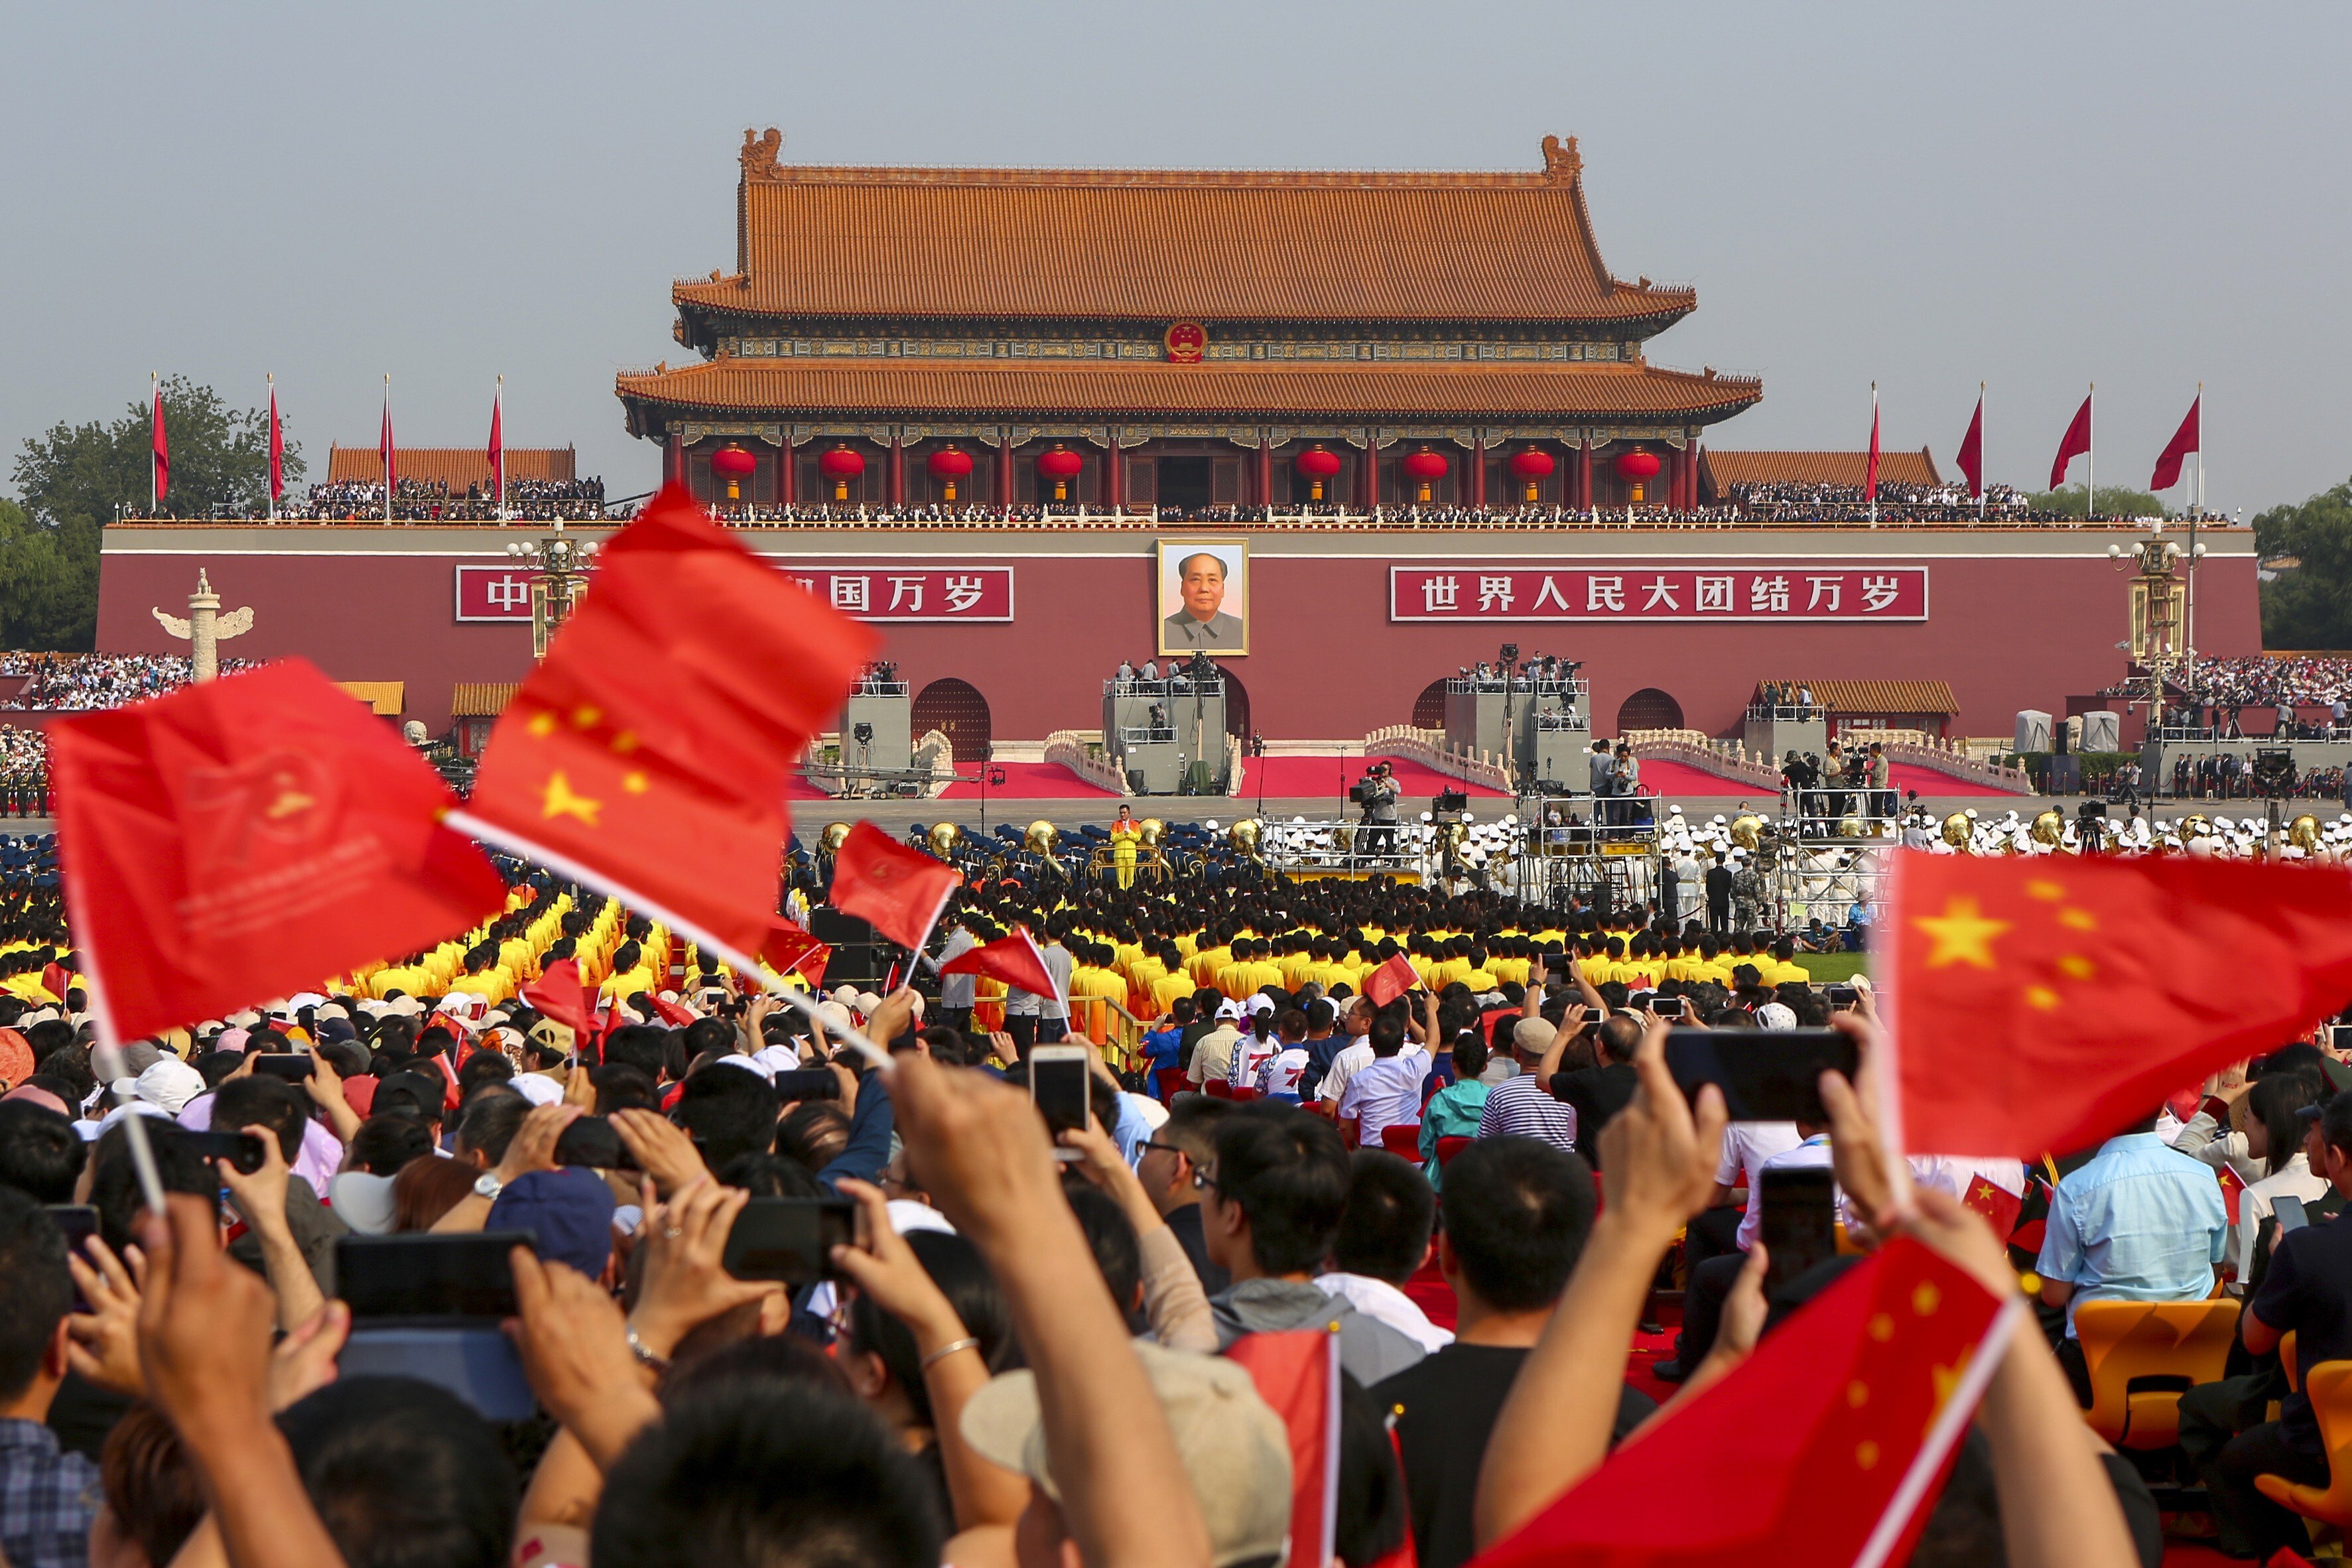 An increasing number of Britons see China’s rise as a “critical threat”, according to the survey. Photo: Xinhua